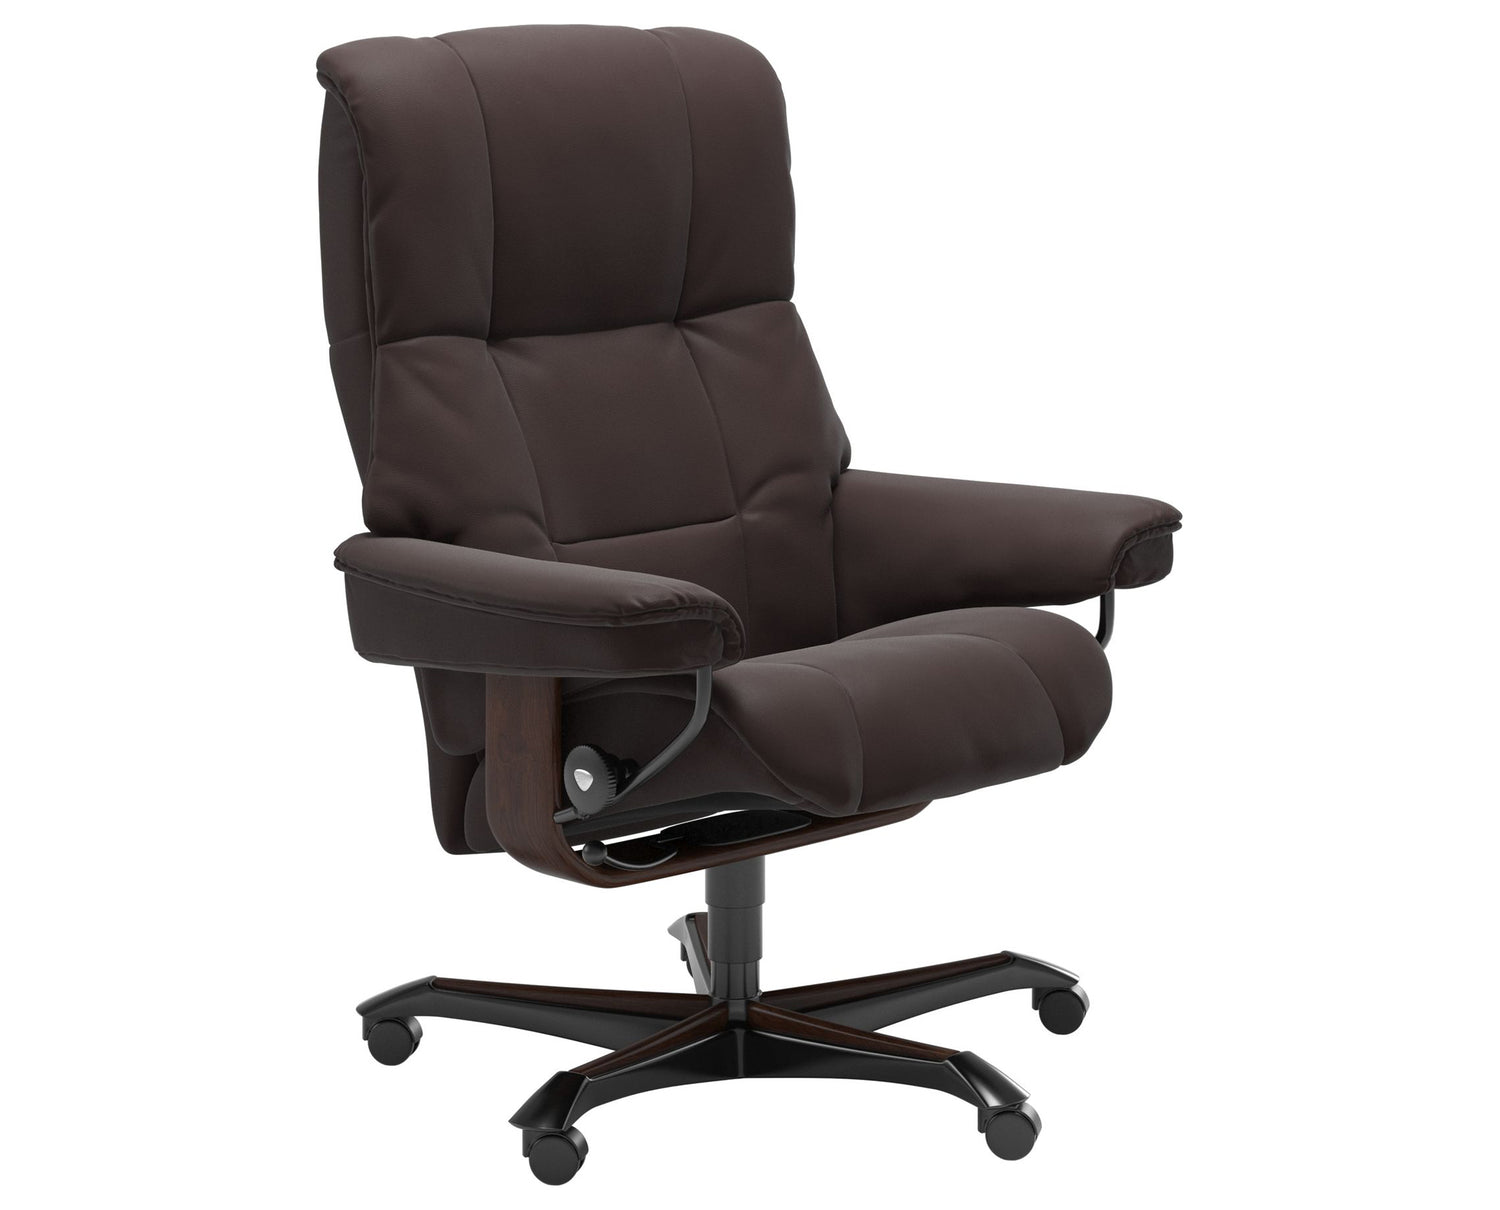 Paloma Leather Chocolate M & Brown Base | Stressless Mayfair Home Office Chair | Valley Ridge Furniture